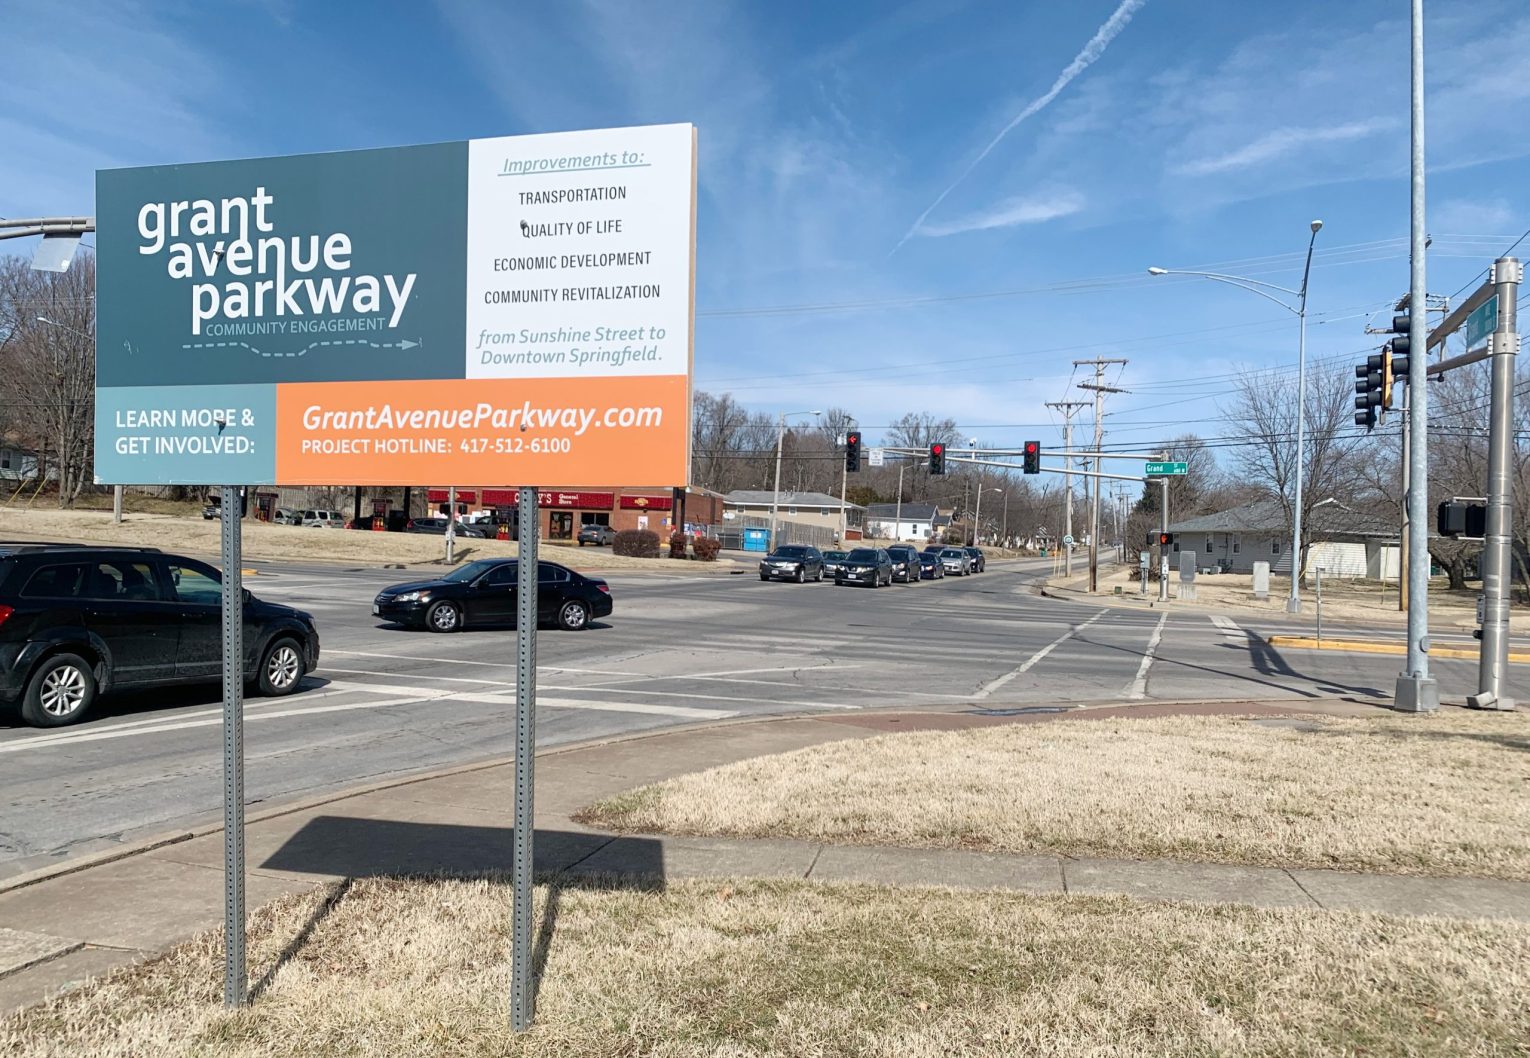 The first mile: consultants study northern end of Grant Avenue Parkway area